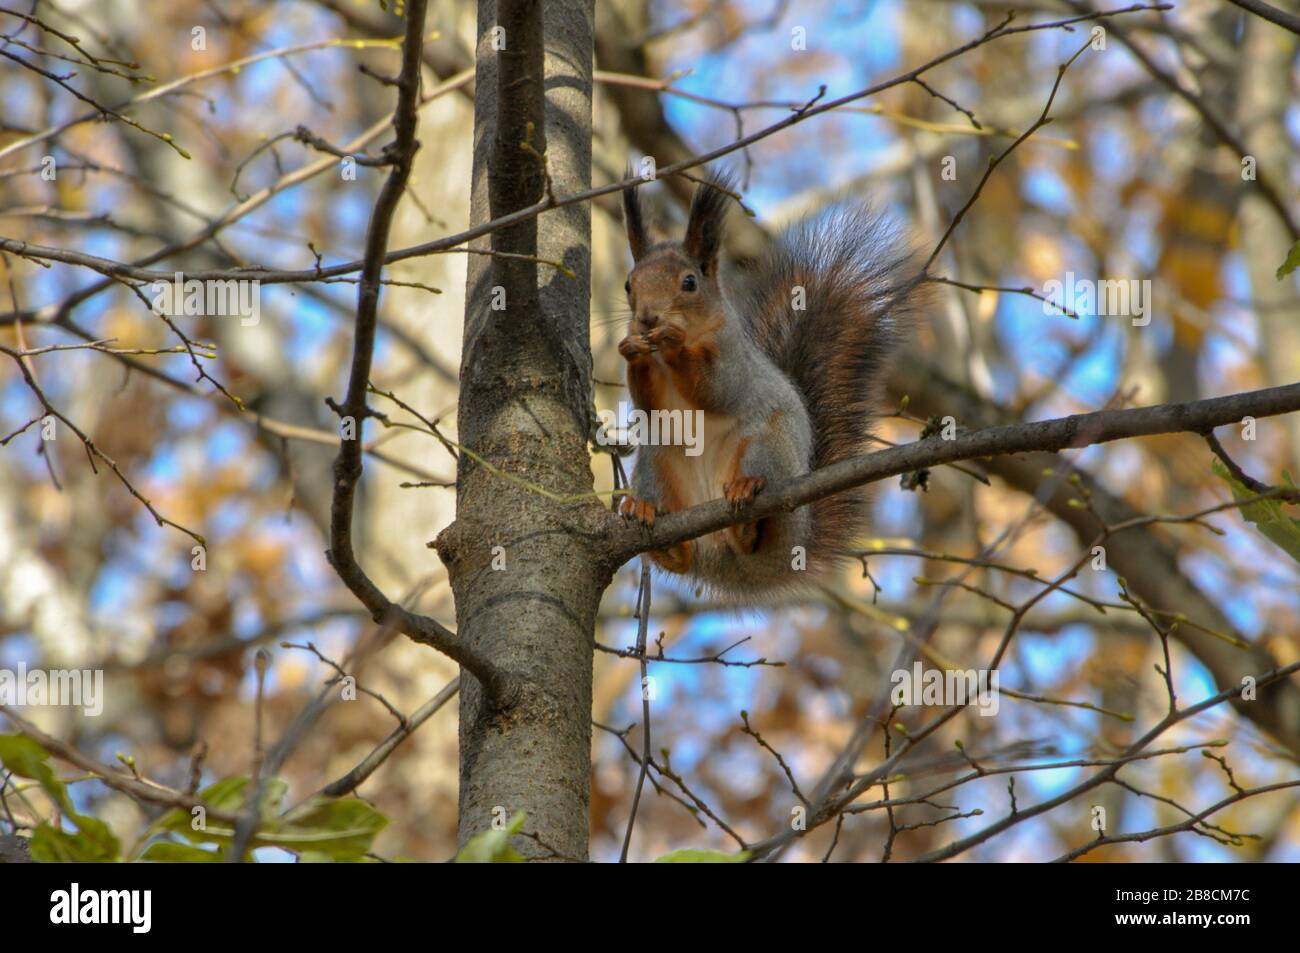 Cute squirrel with fluffy tail sits on a tree branch and eats something. Stock Photo